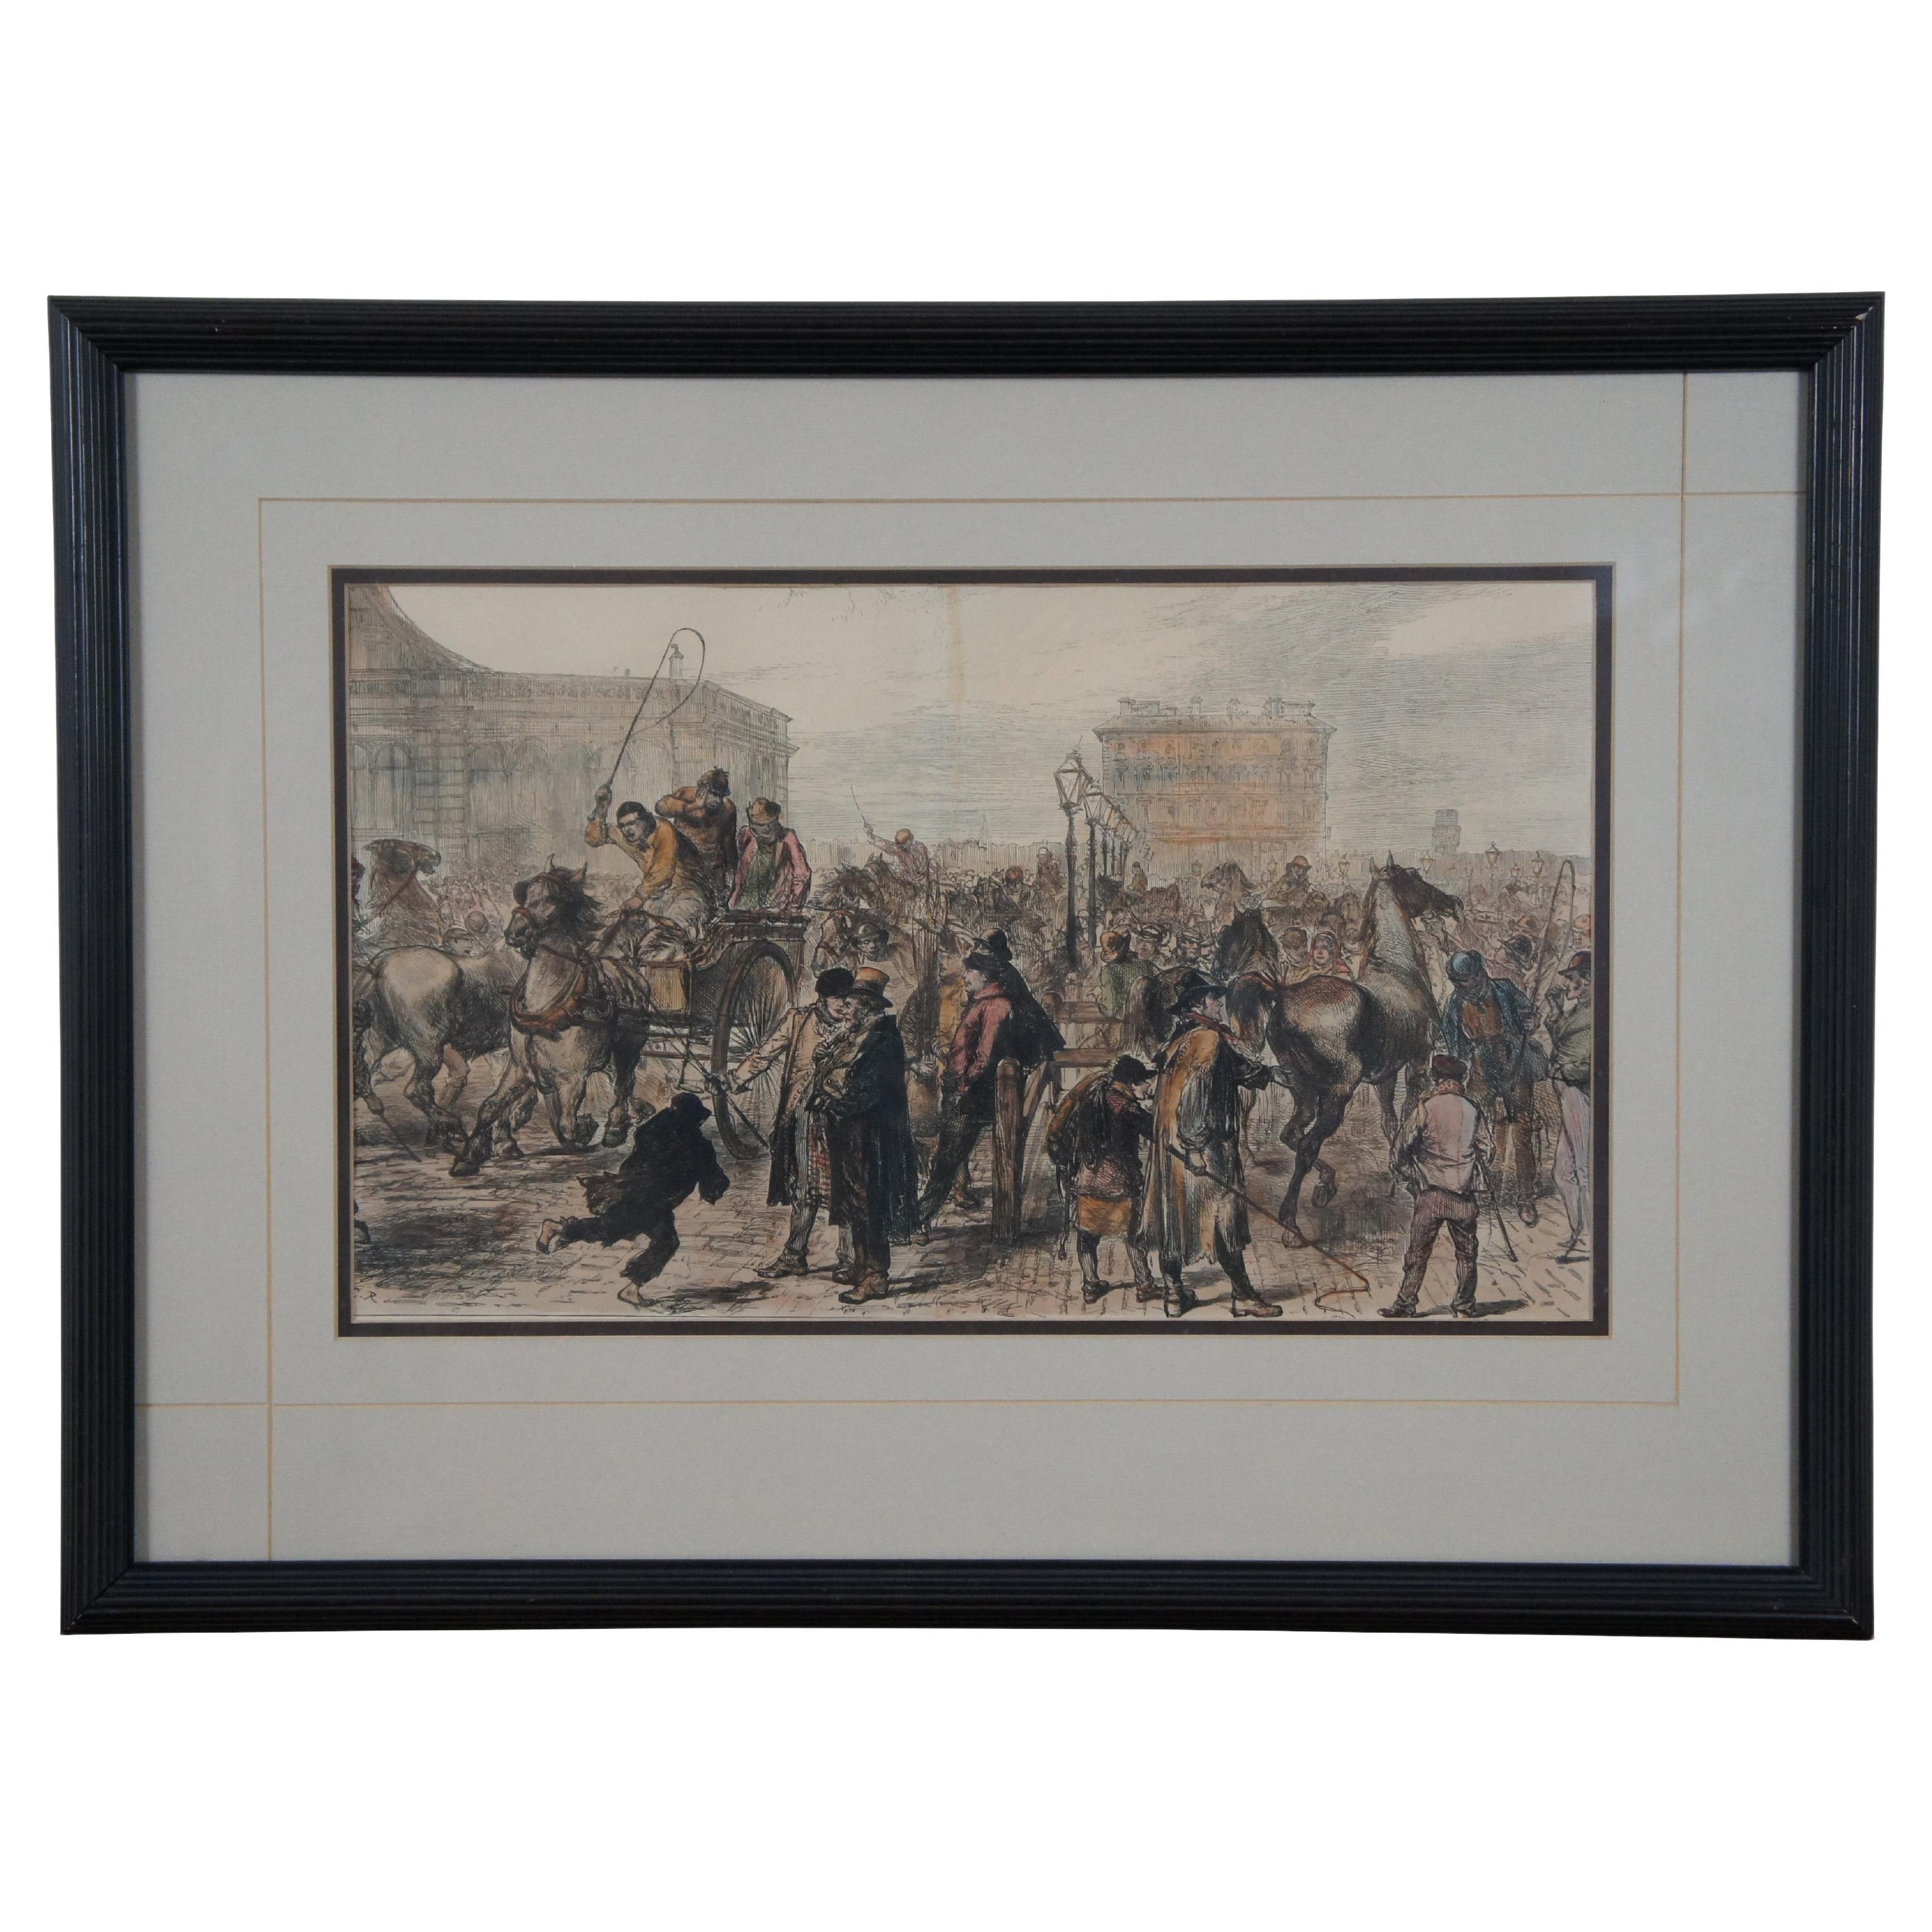 1870s Antique Hand Colored Woodcut Engraving Horse Market at Islington Framed For Sale